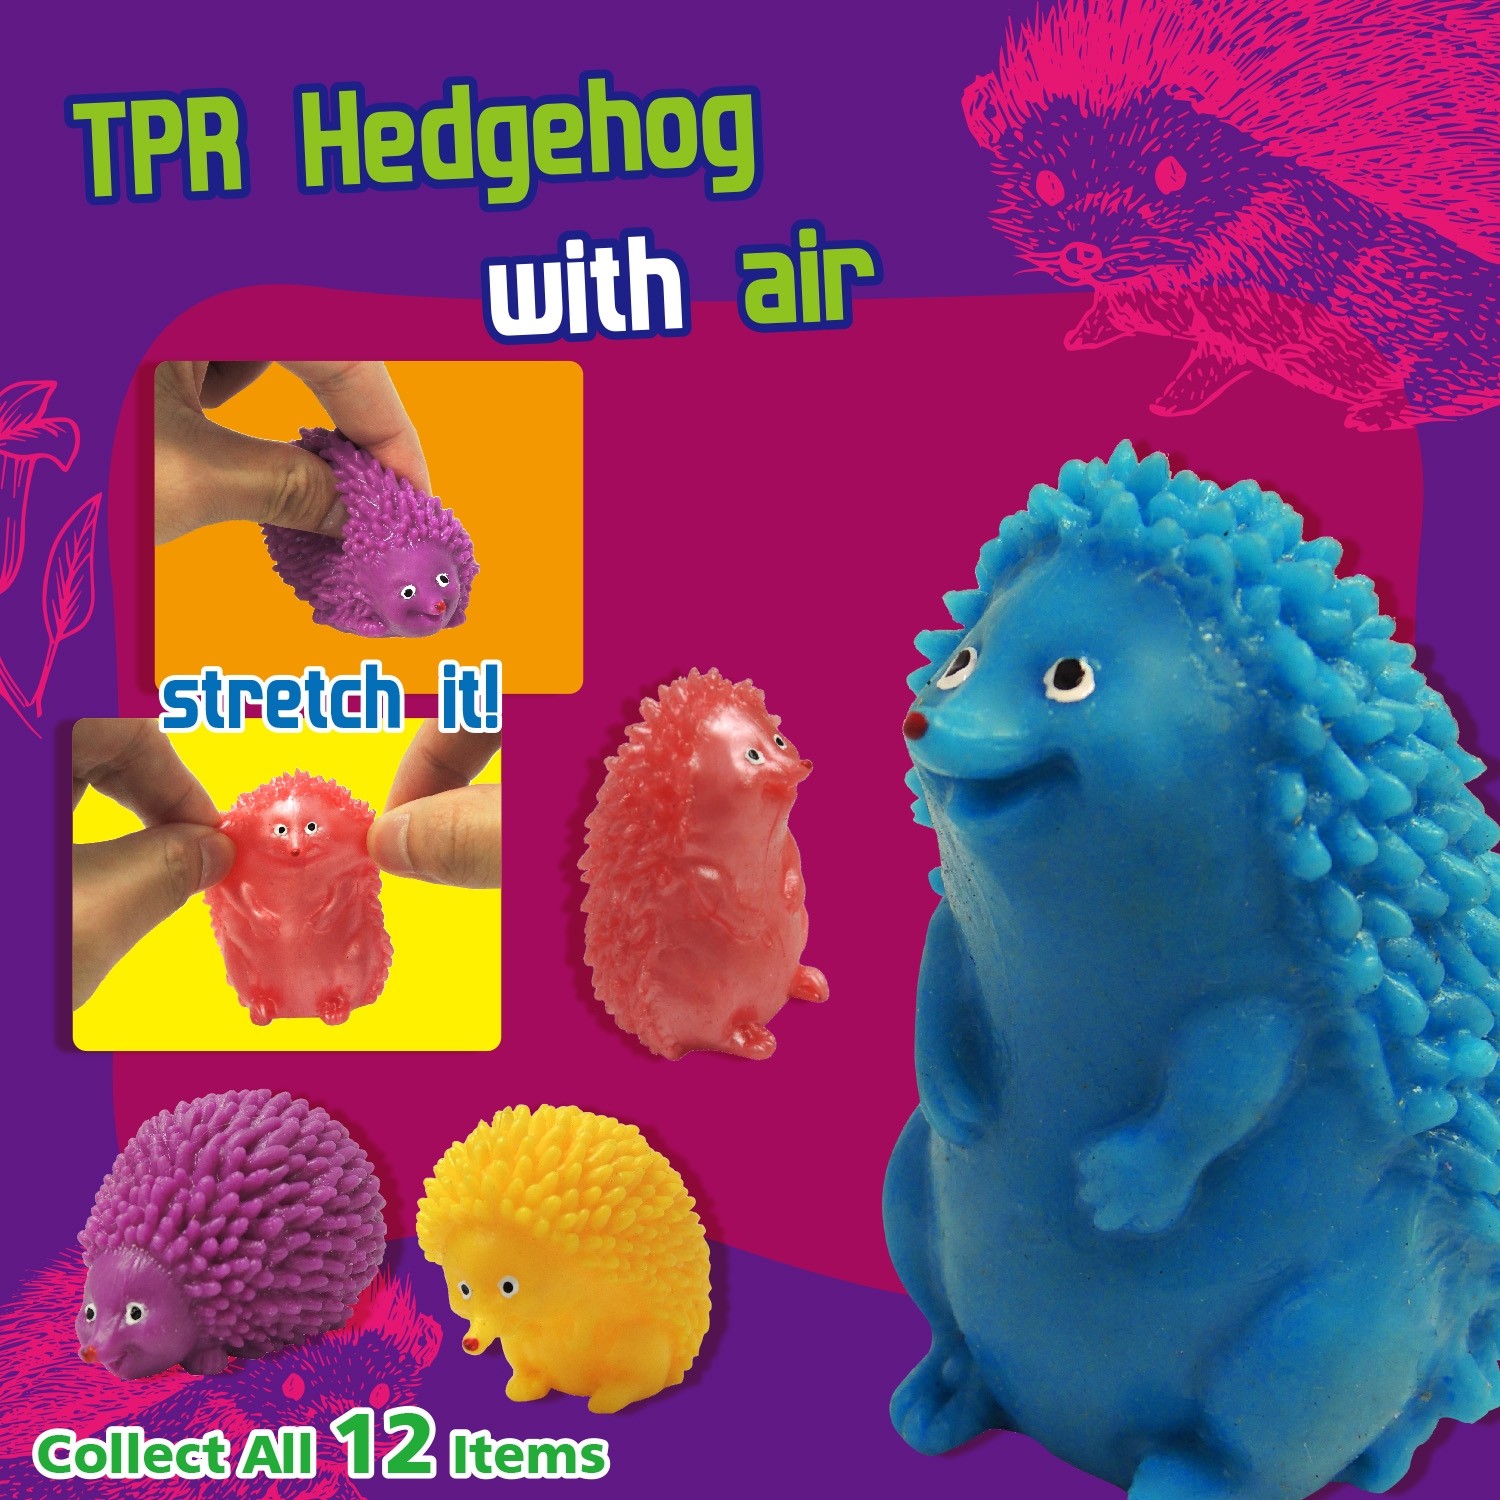  TPR Hedgehog with air